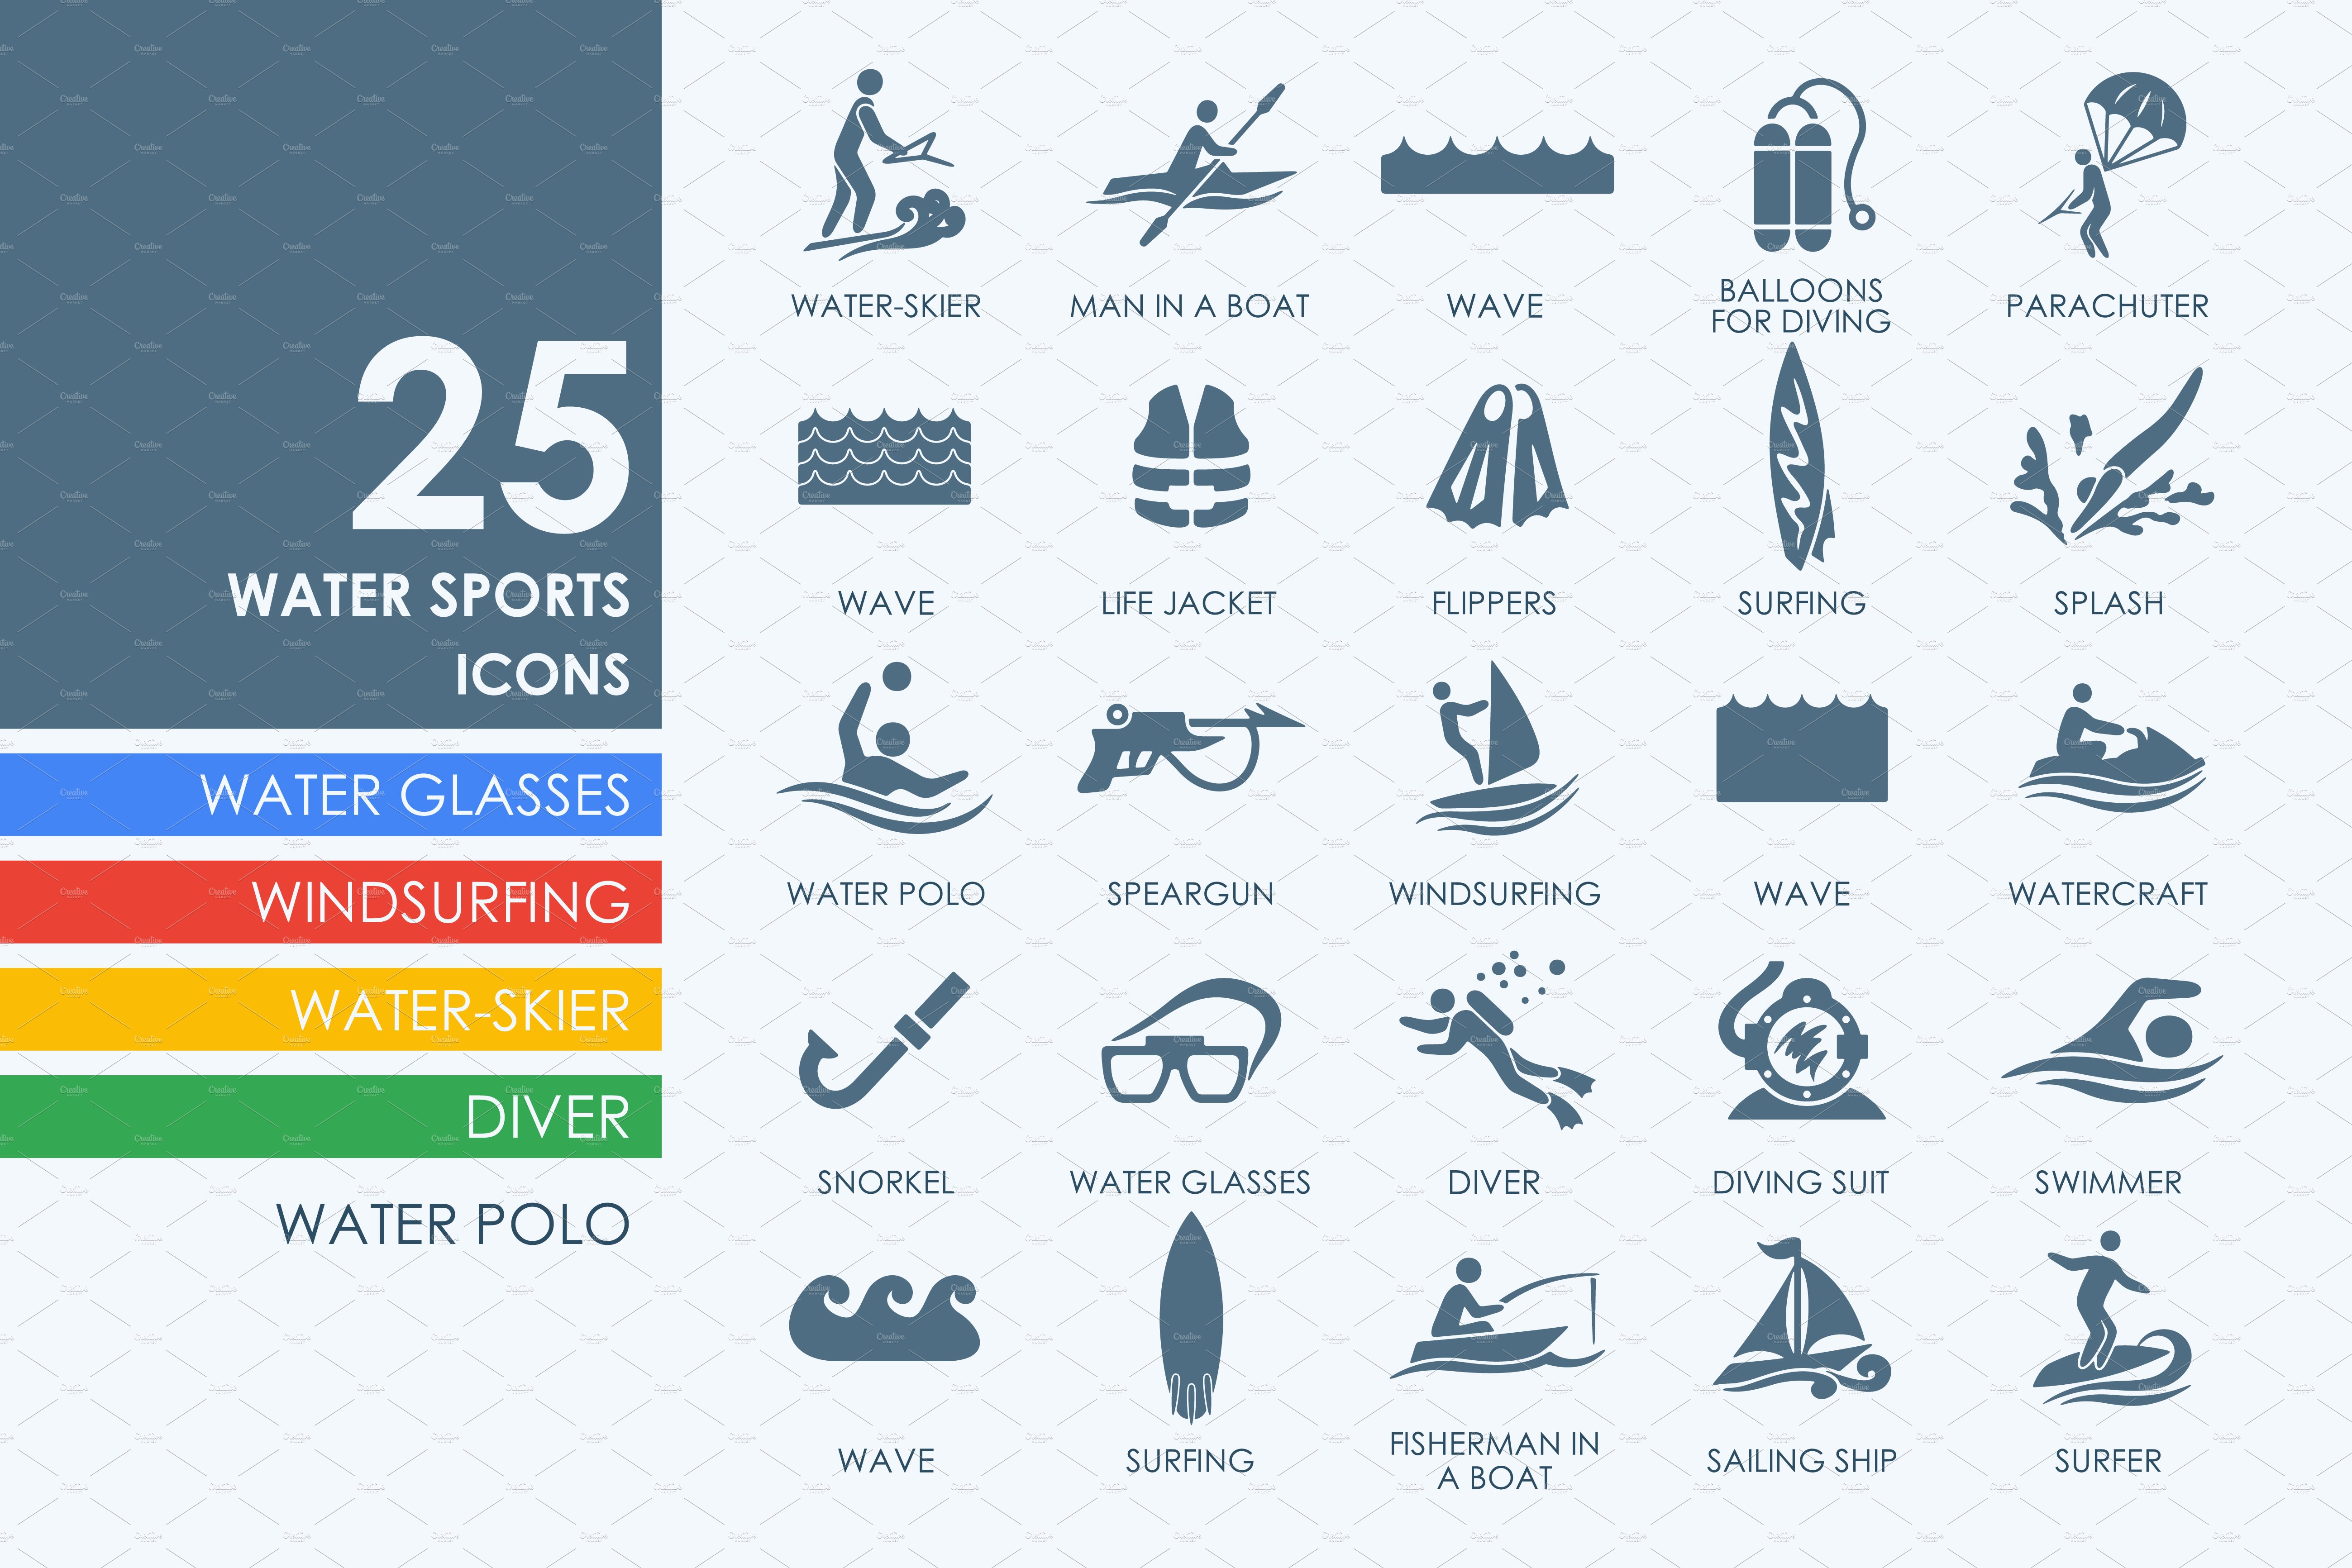 25 Water Sports icons cover image.